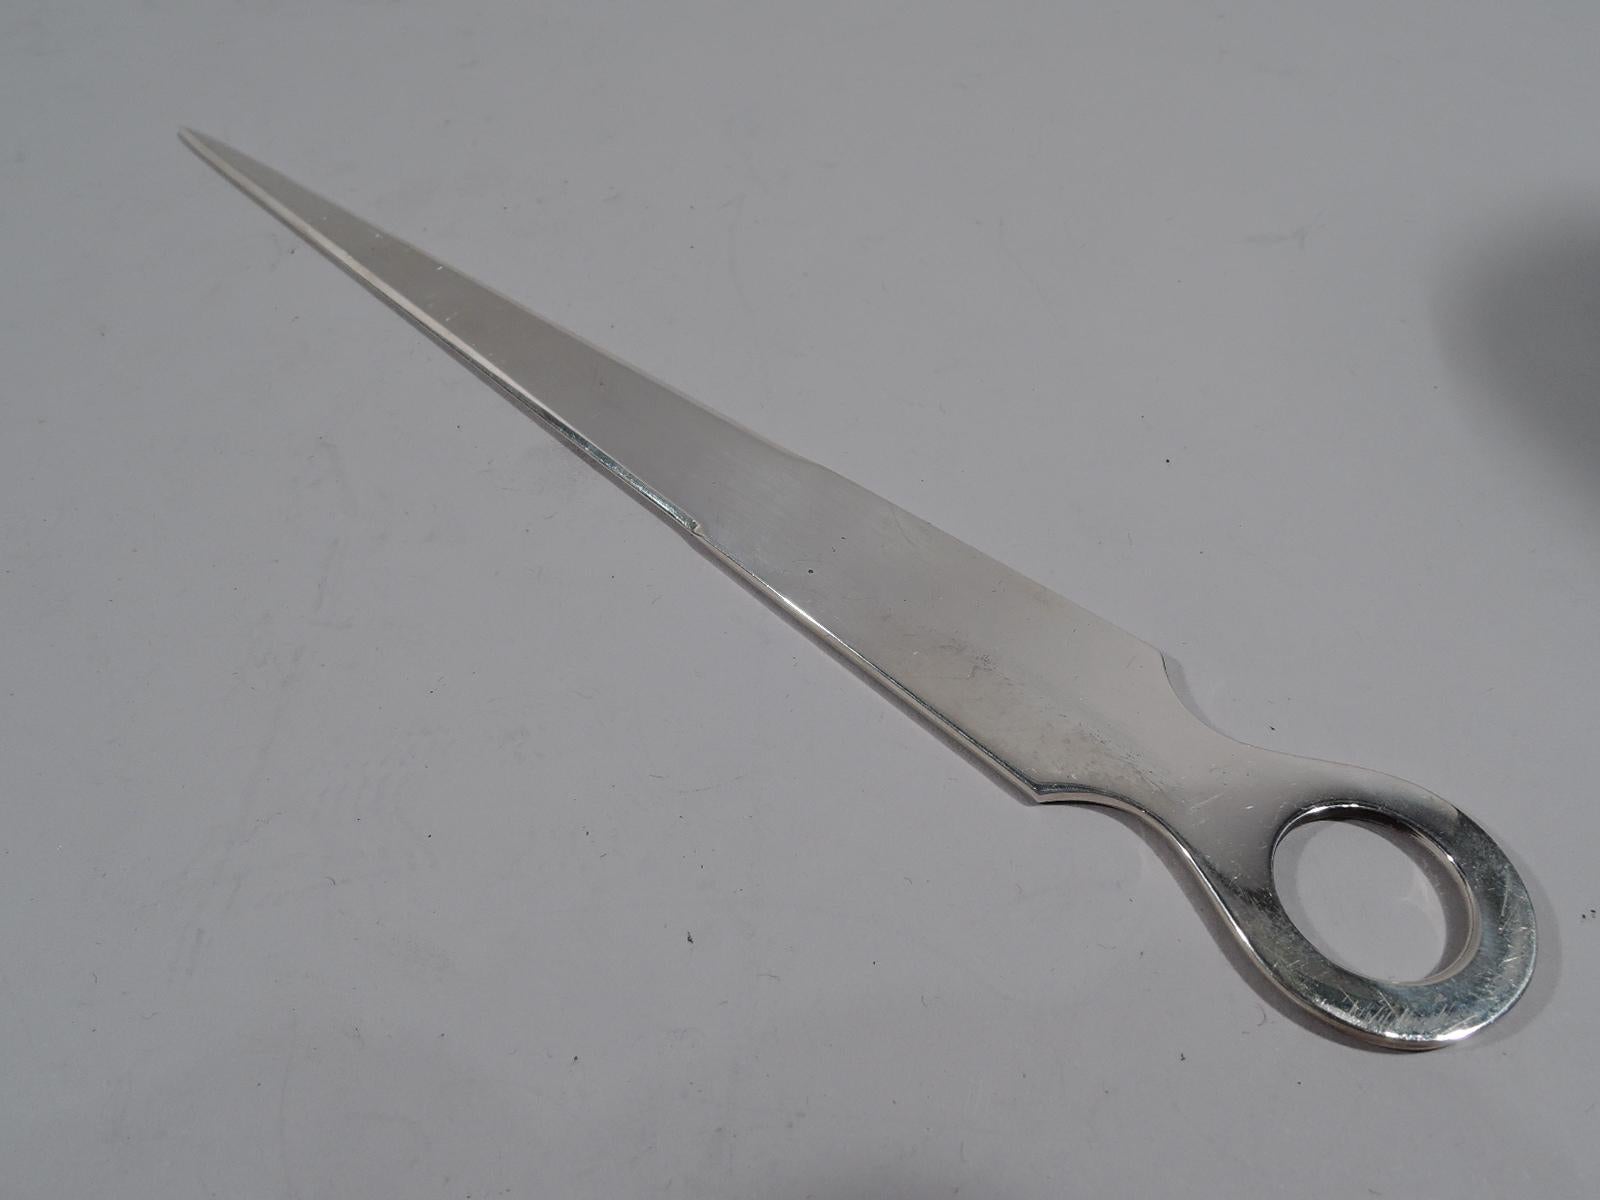 Traditional sterling silver letter opener. Retailed by Tiffany & Co. in New York. Flat and tapering pointed blade and oval ring handle. Marked “Tiffany & Co. / Sterling / Reproduction / 3”. Weight: 1.8 troy ounces.